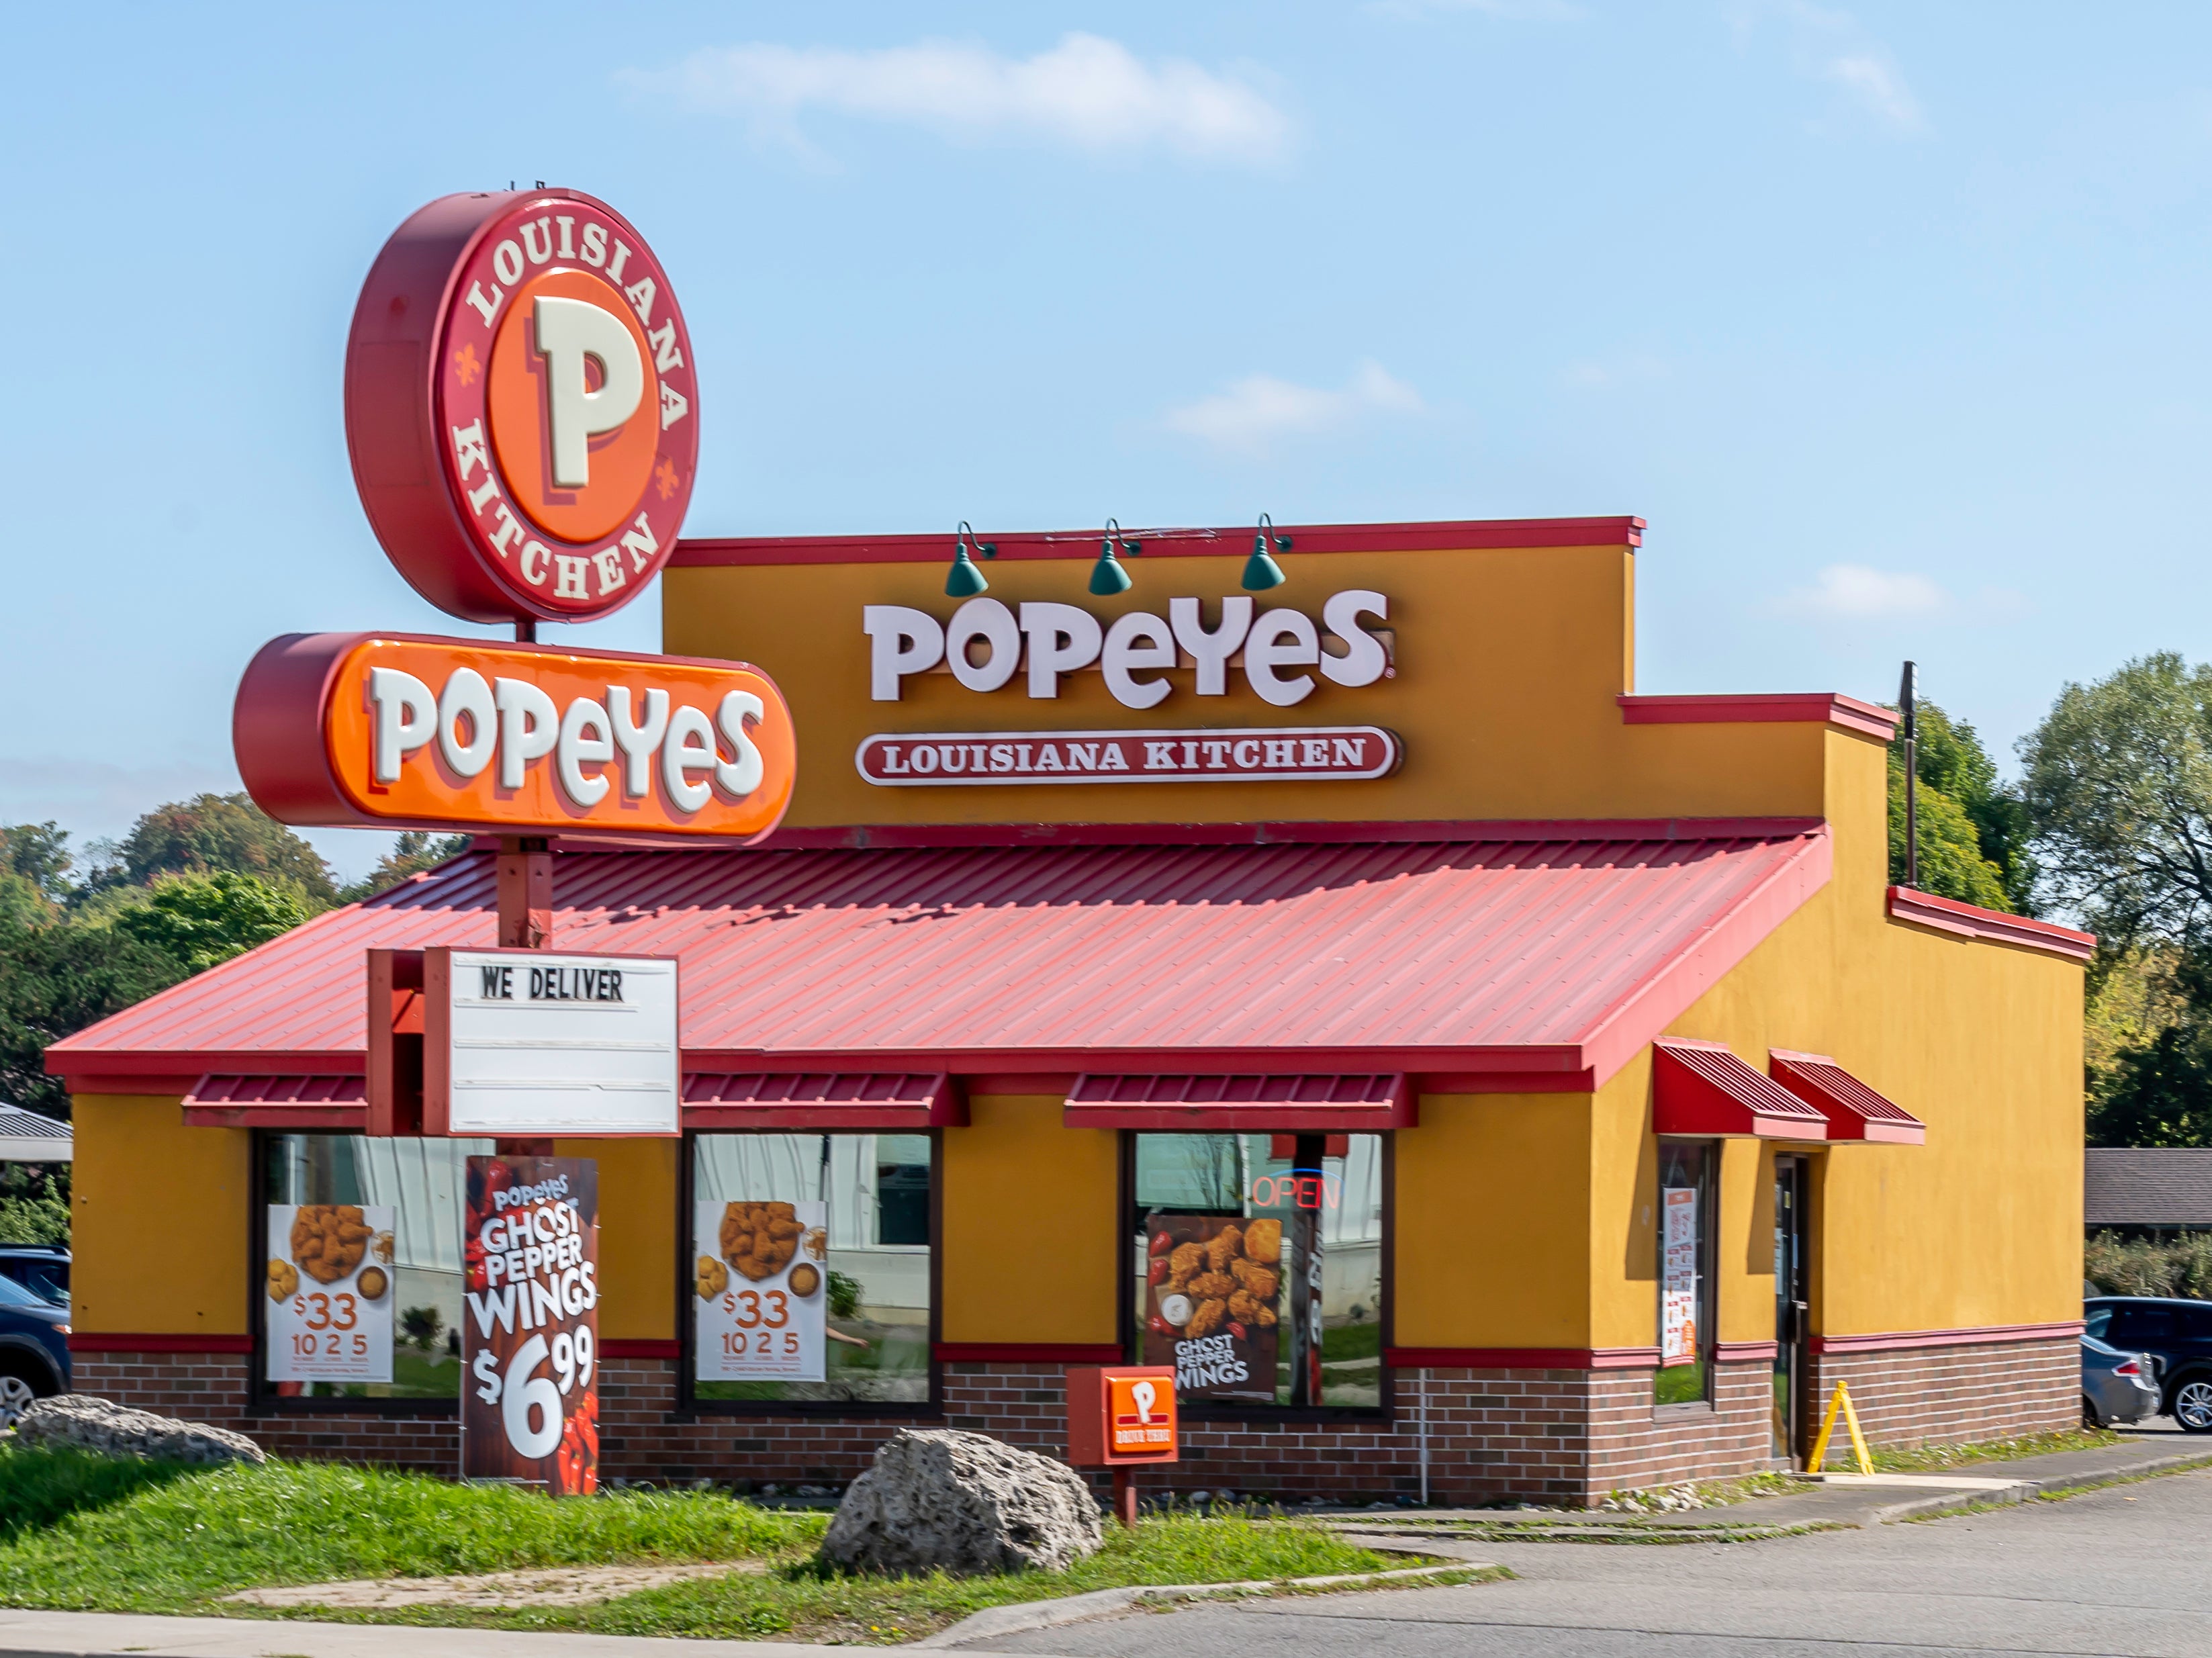 Popeyes fried chicken chain to open new stores across the UK The